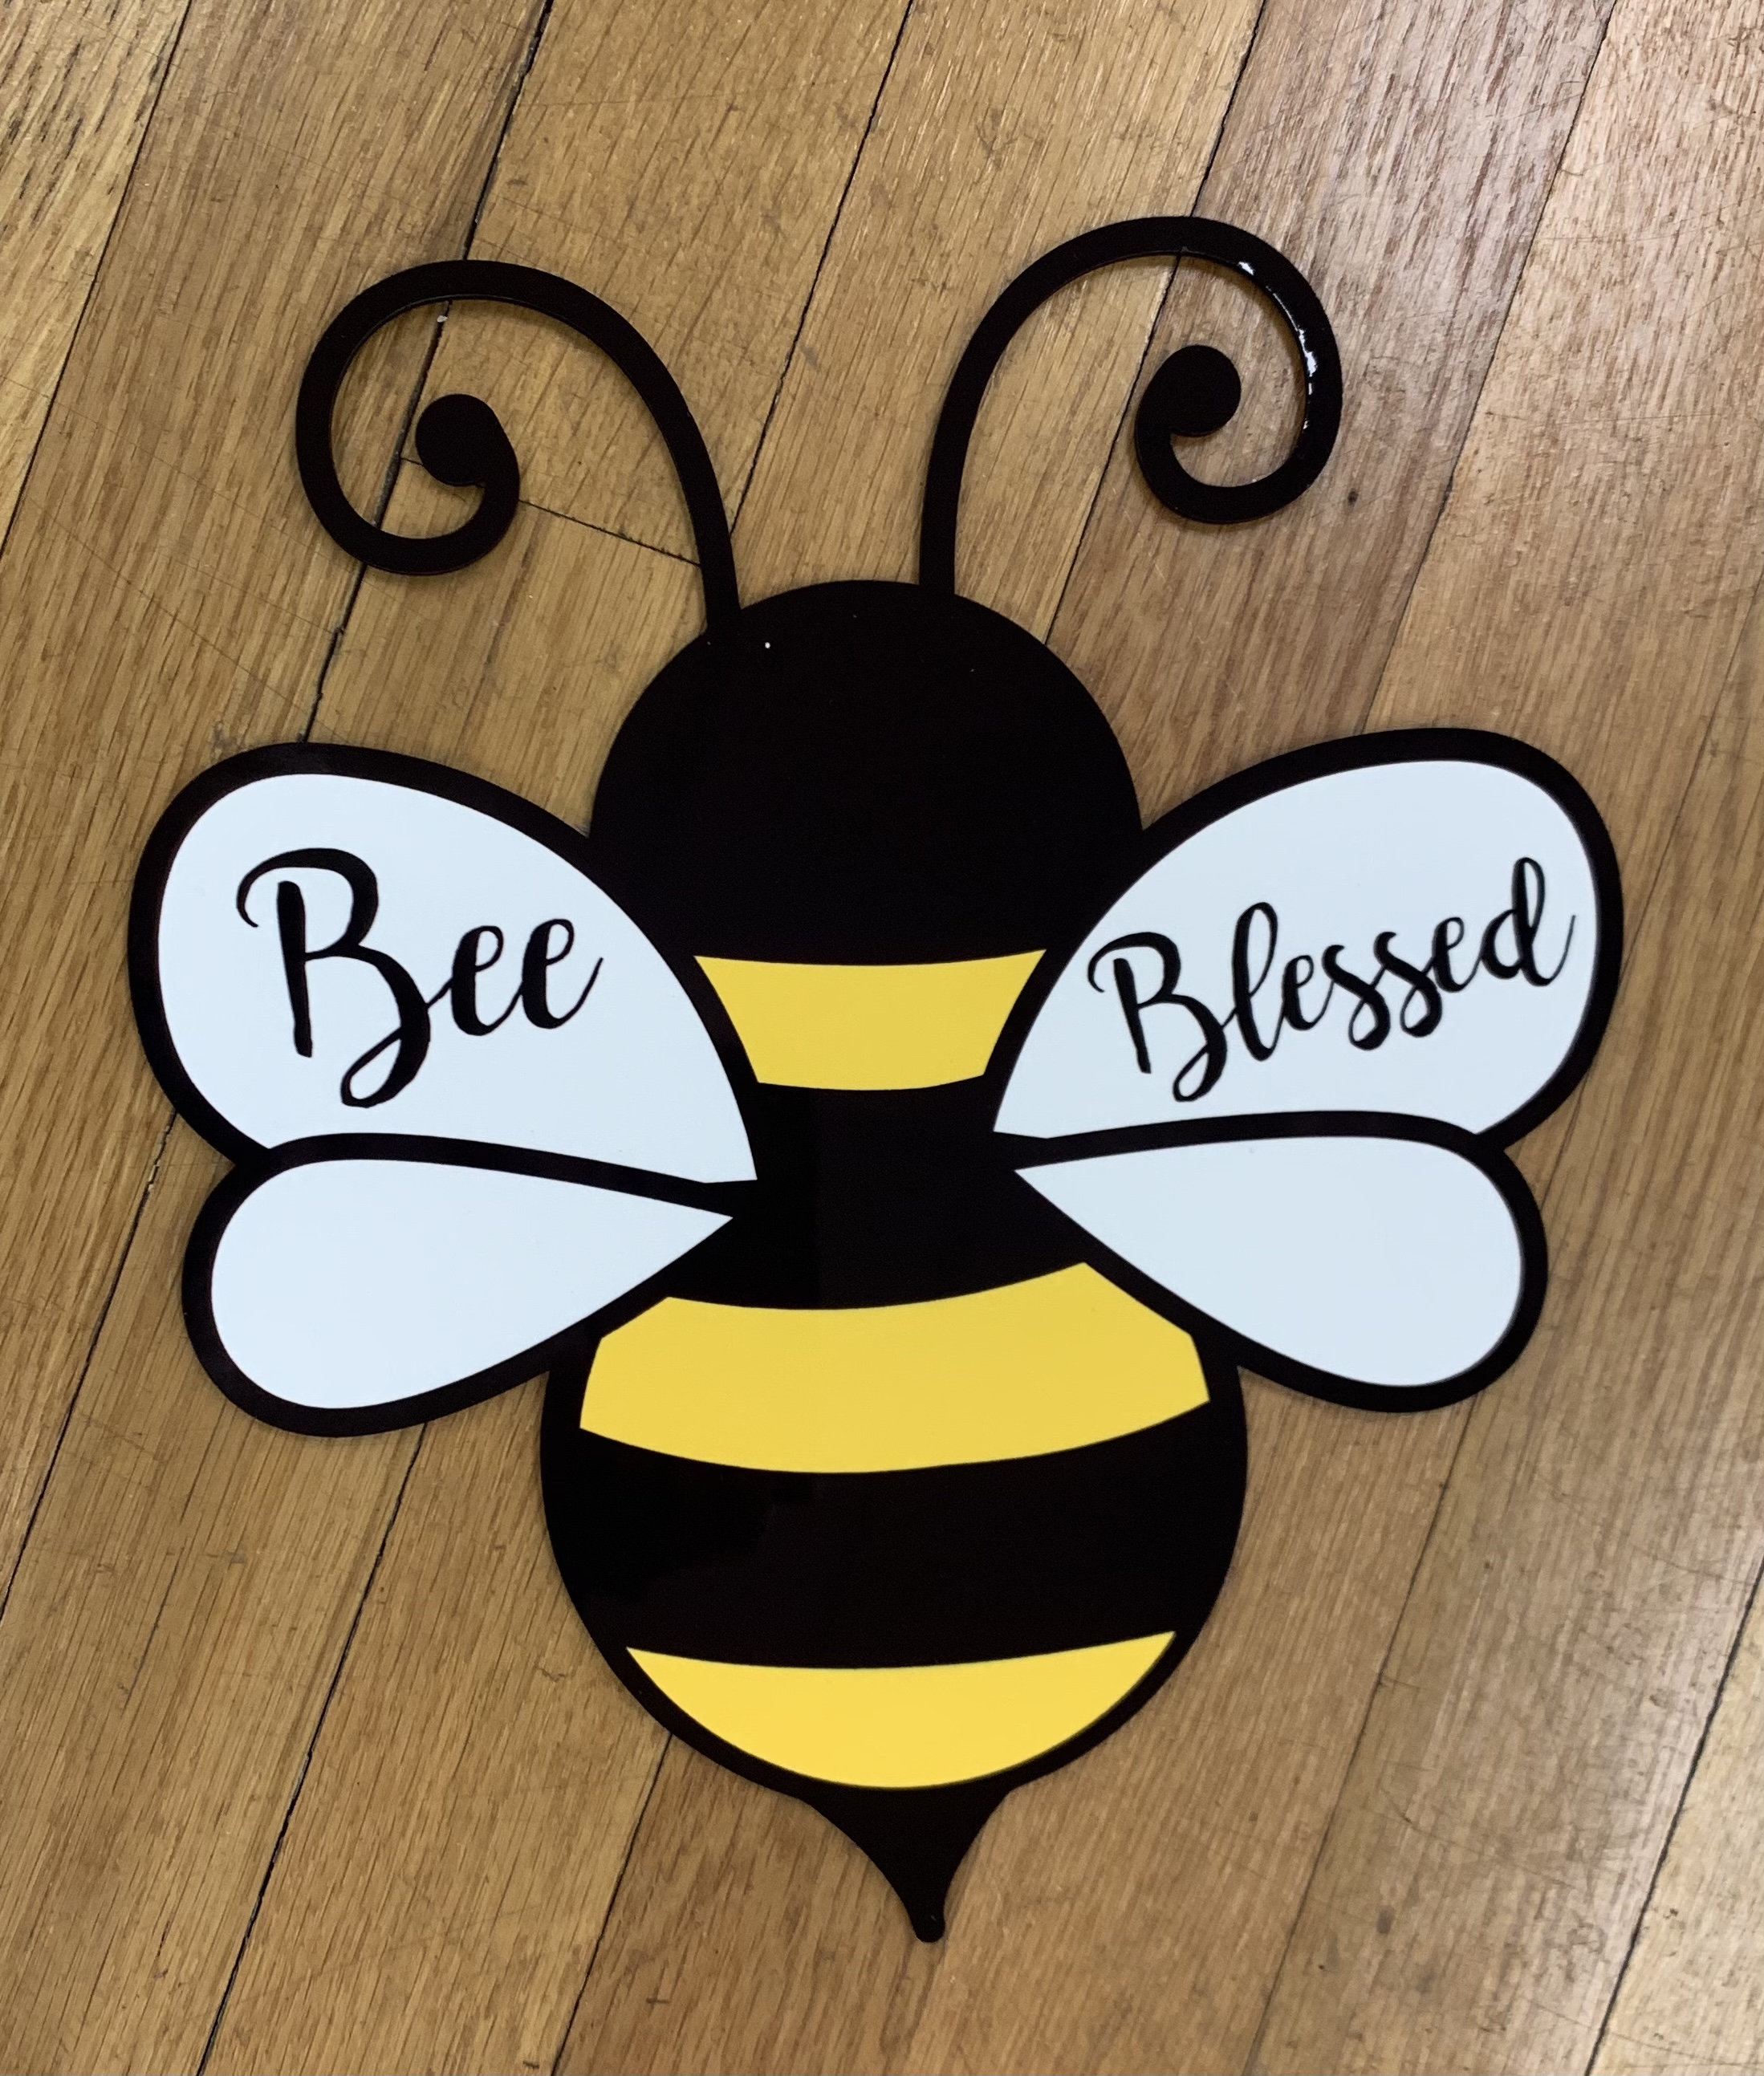 Laser cut then sublimated this Bee for a wreath attachment 